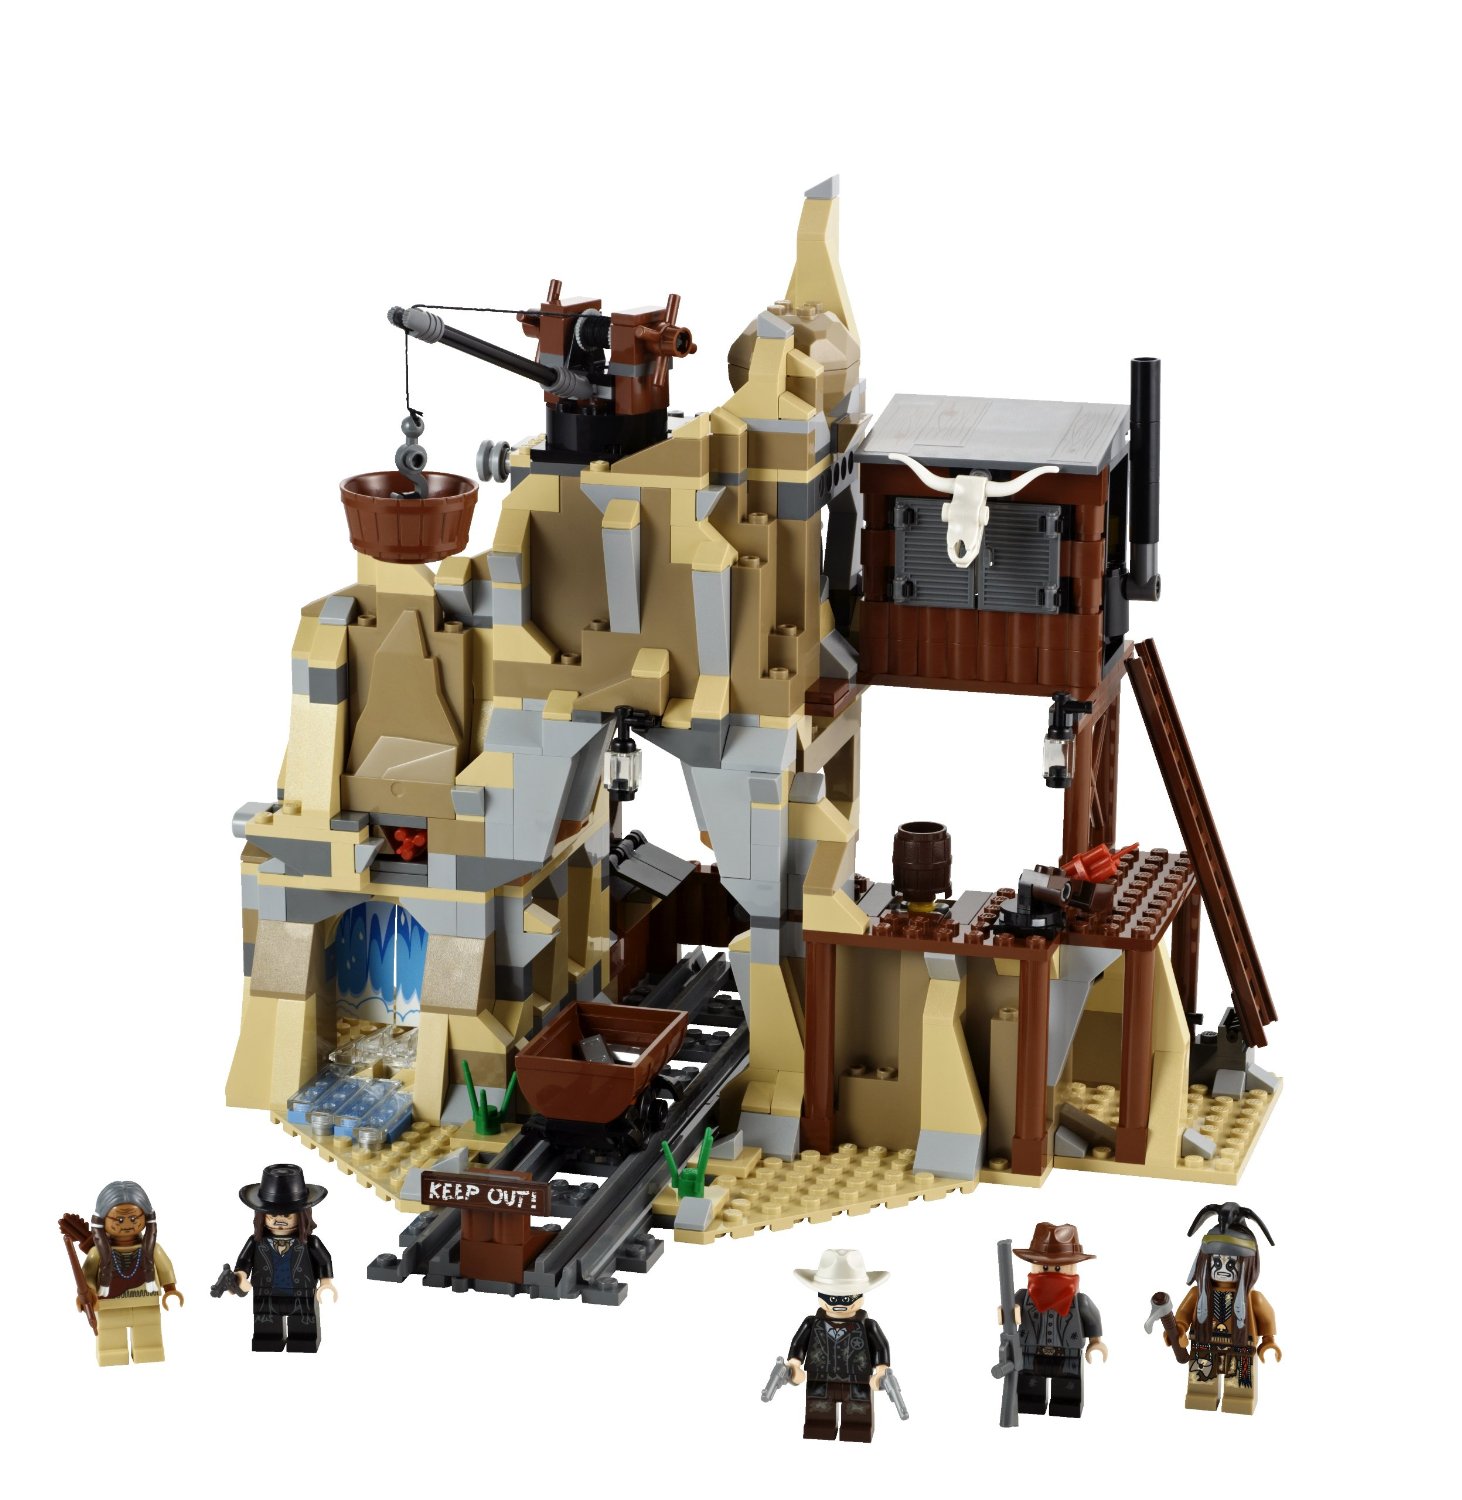 The Brothers Brick: Lego Lone Ranger Silver Mine Shootout Review